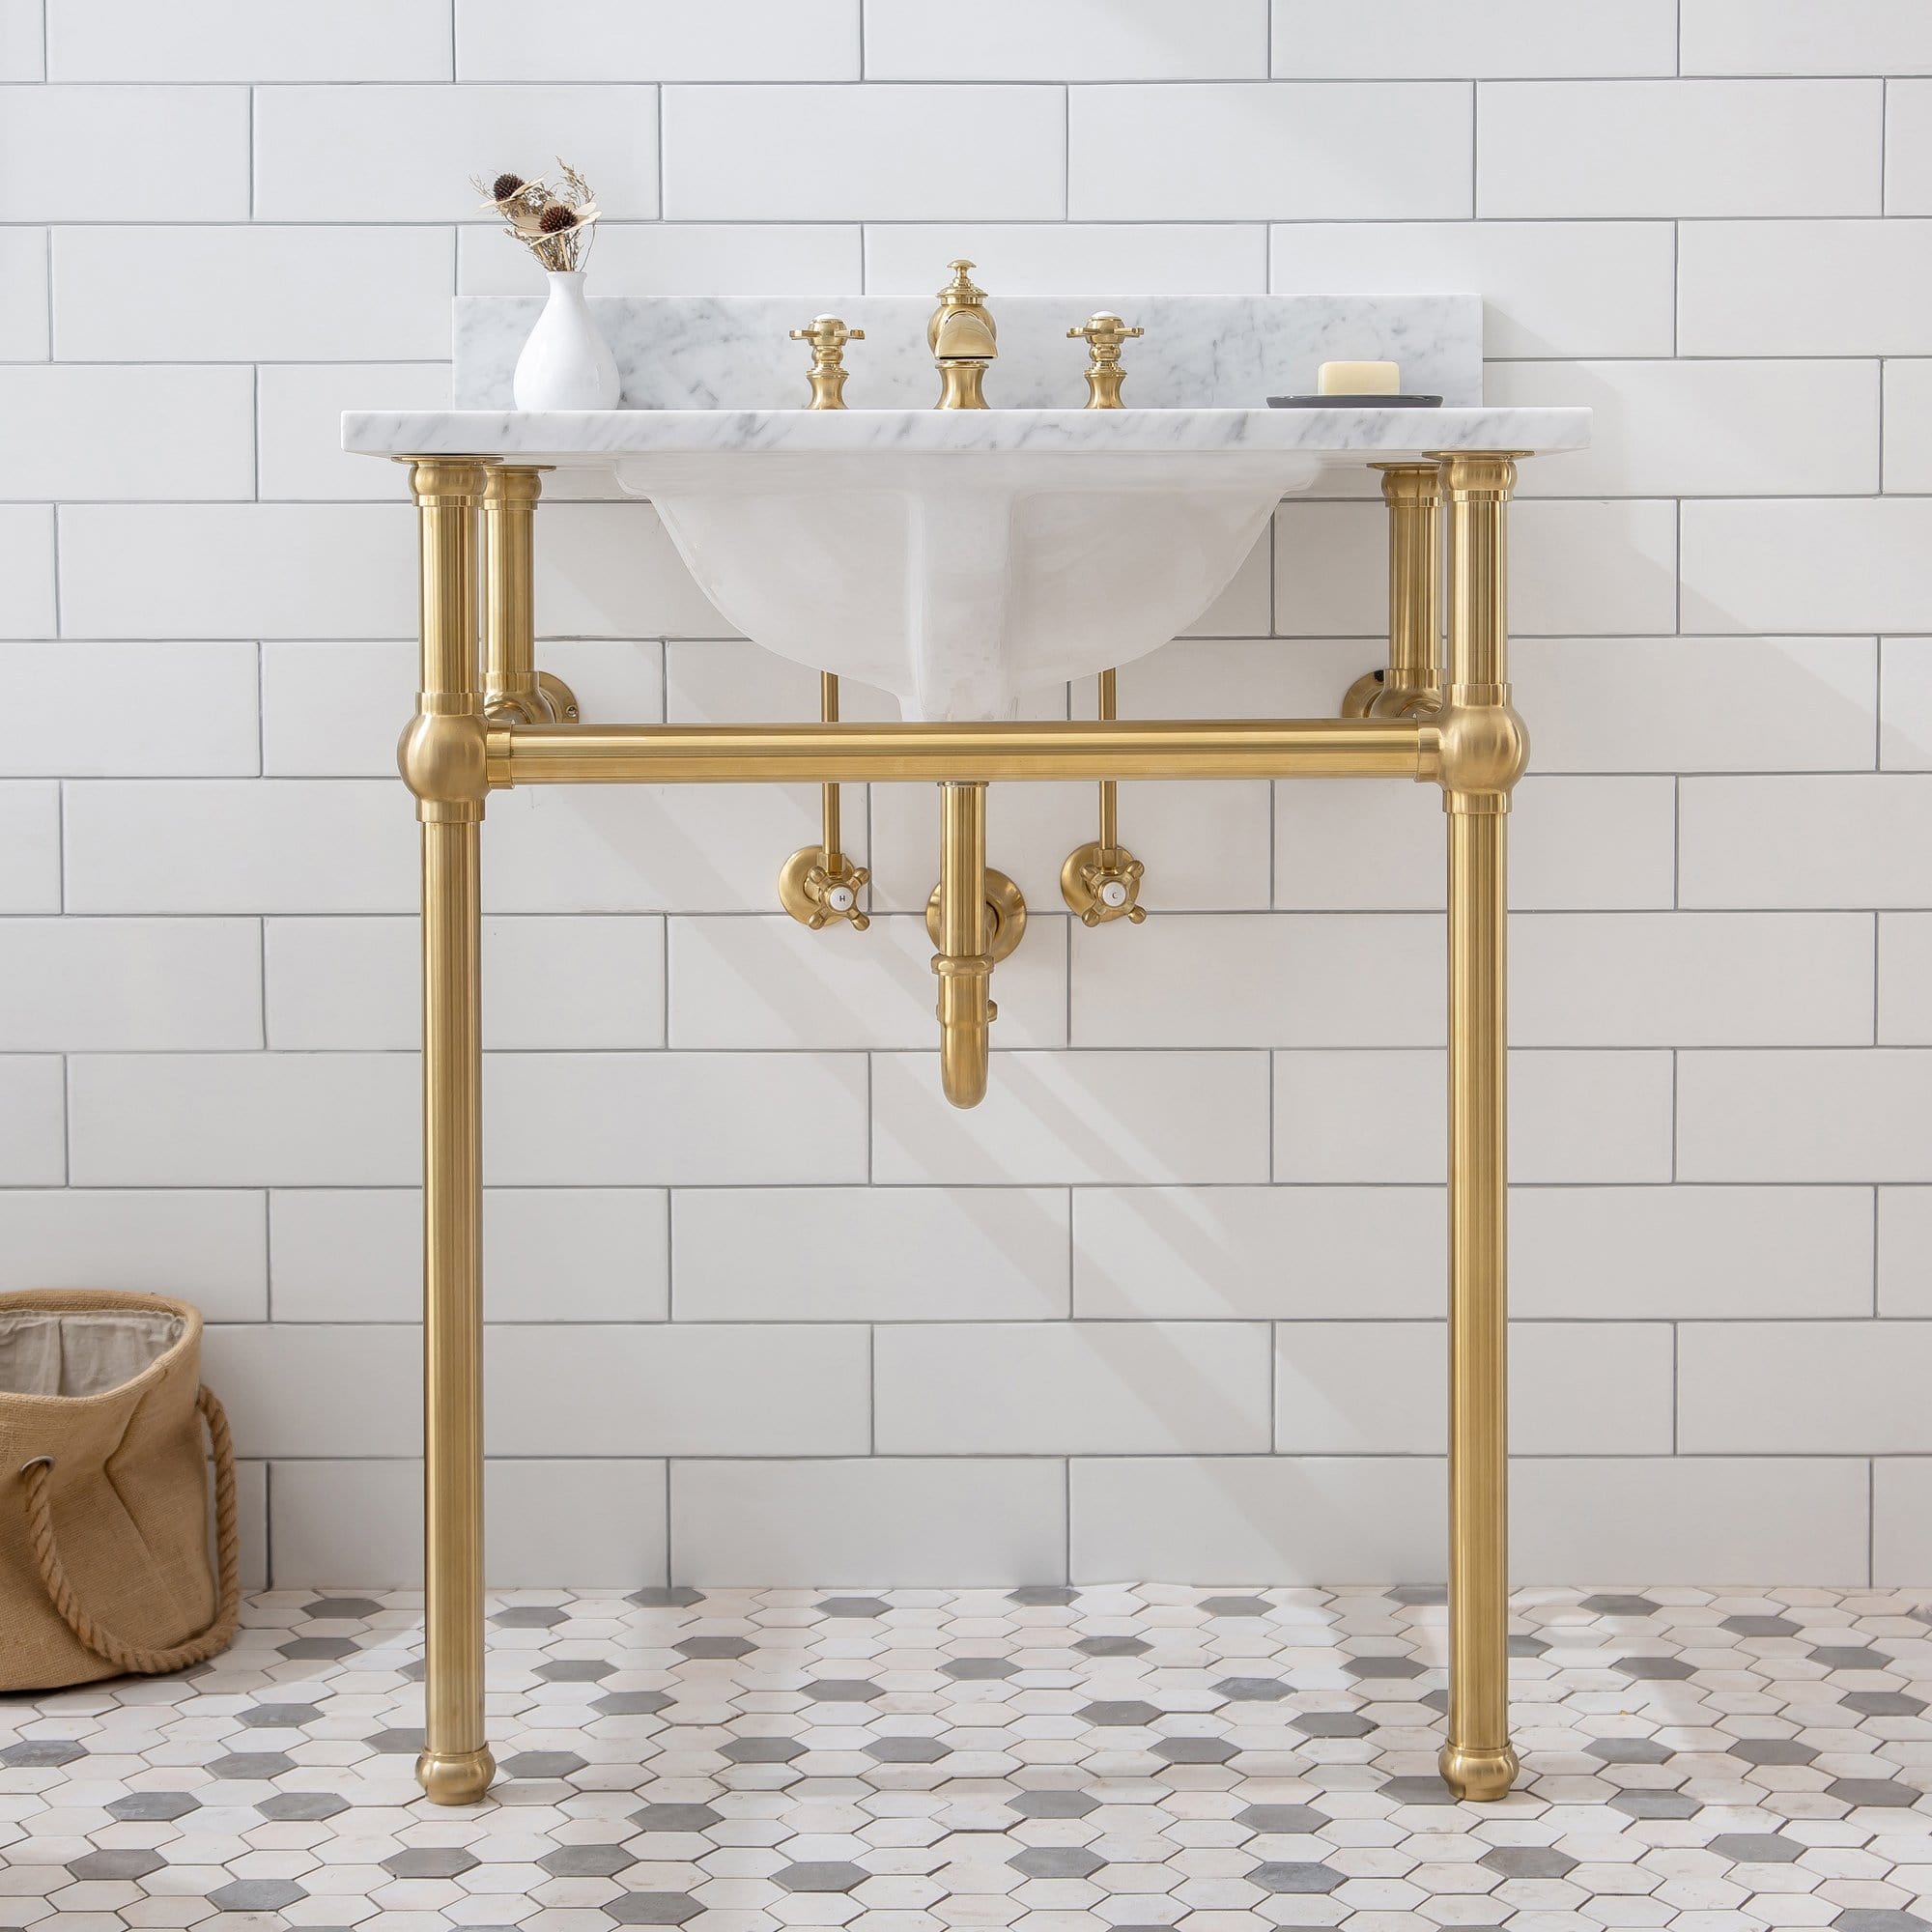 Water Creation Embassy 30 Inch Wide Single Wash Stand, P-Trap, Counter Top with Basin, F2-0013 Faucet and Mirror included in Satin Gold Finish - Molaix732030757288Wash StandEB30E-0613